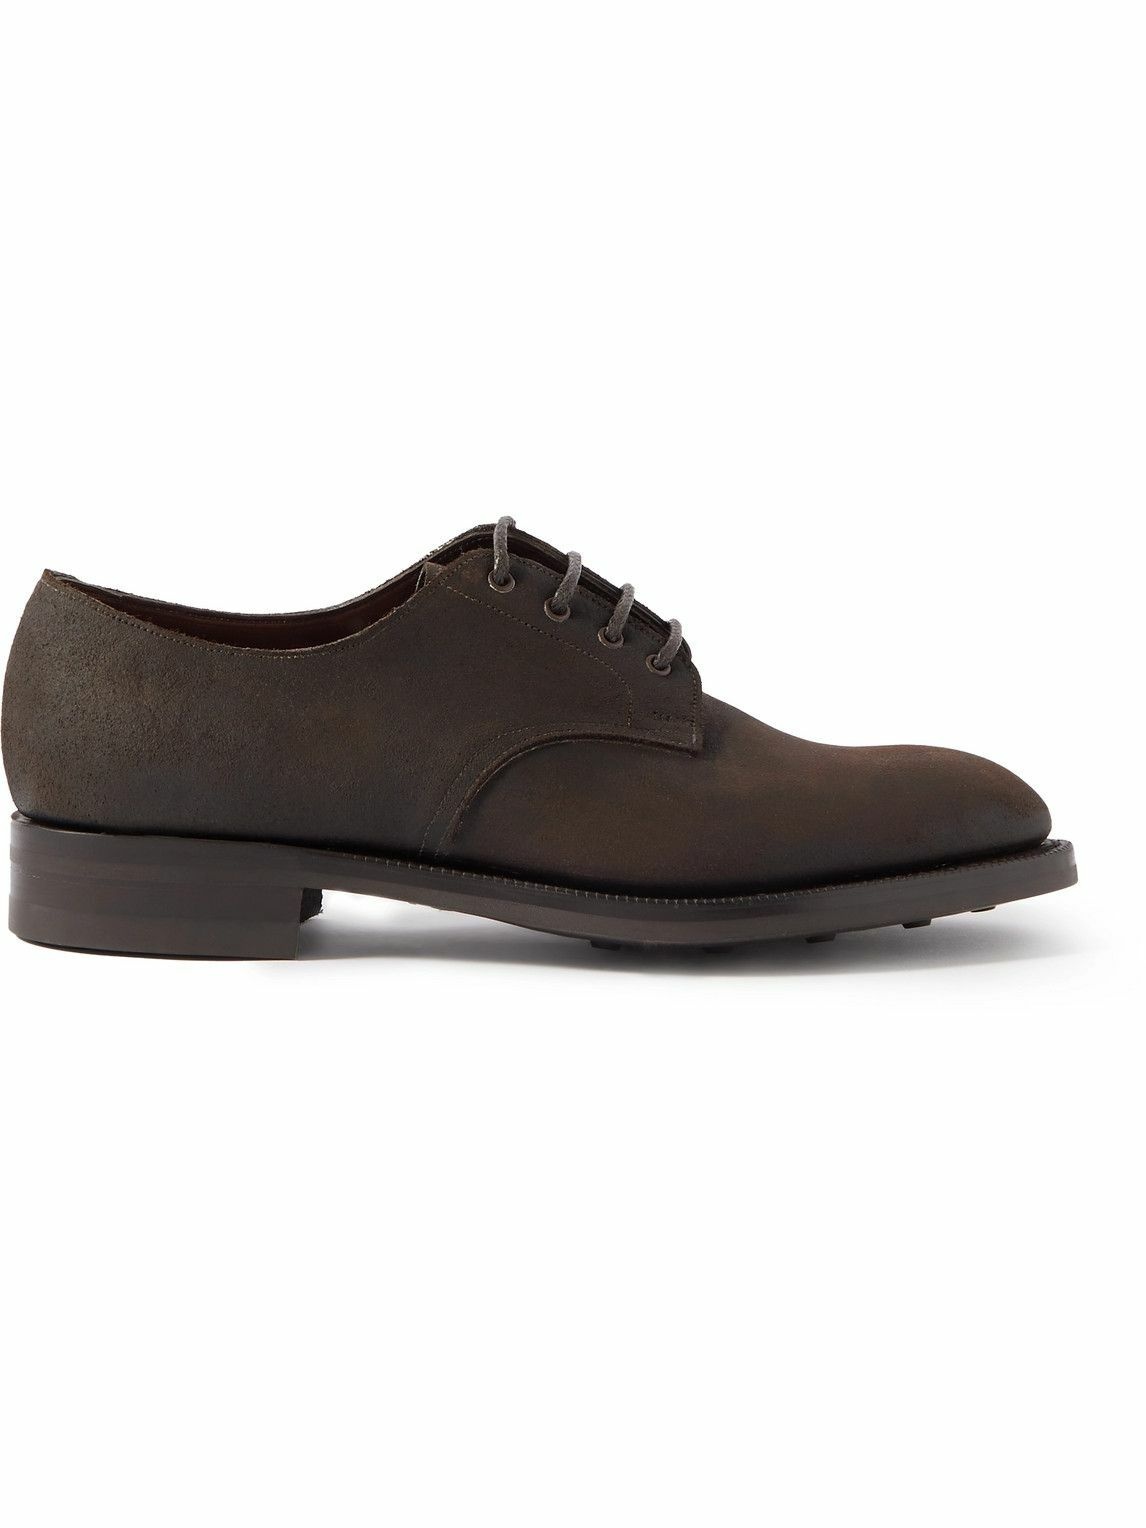 Photo: Edward Green - Leith Suede Derby Shoes - Brown